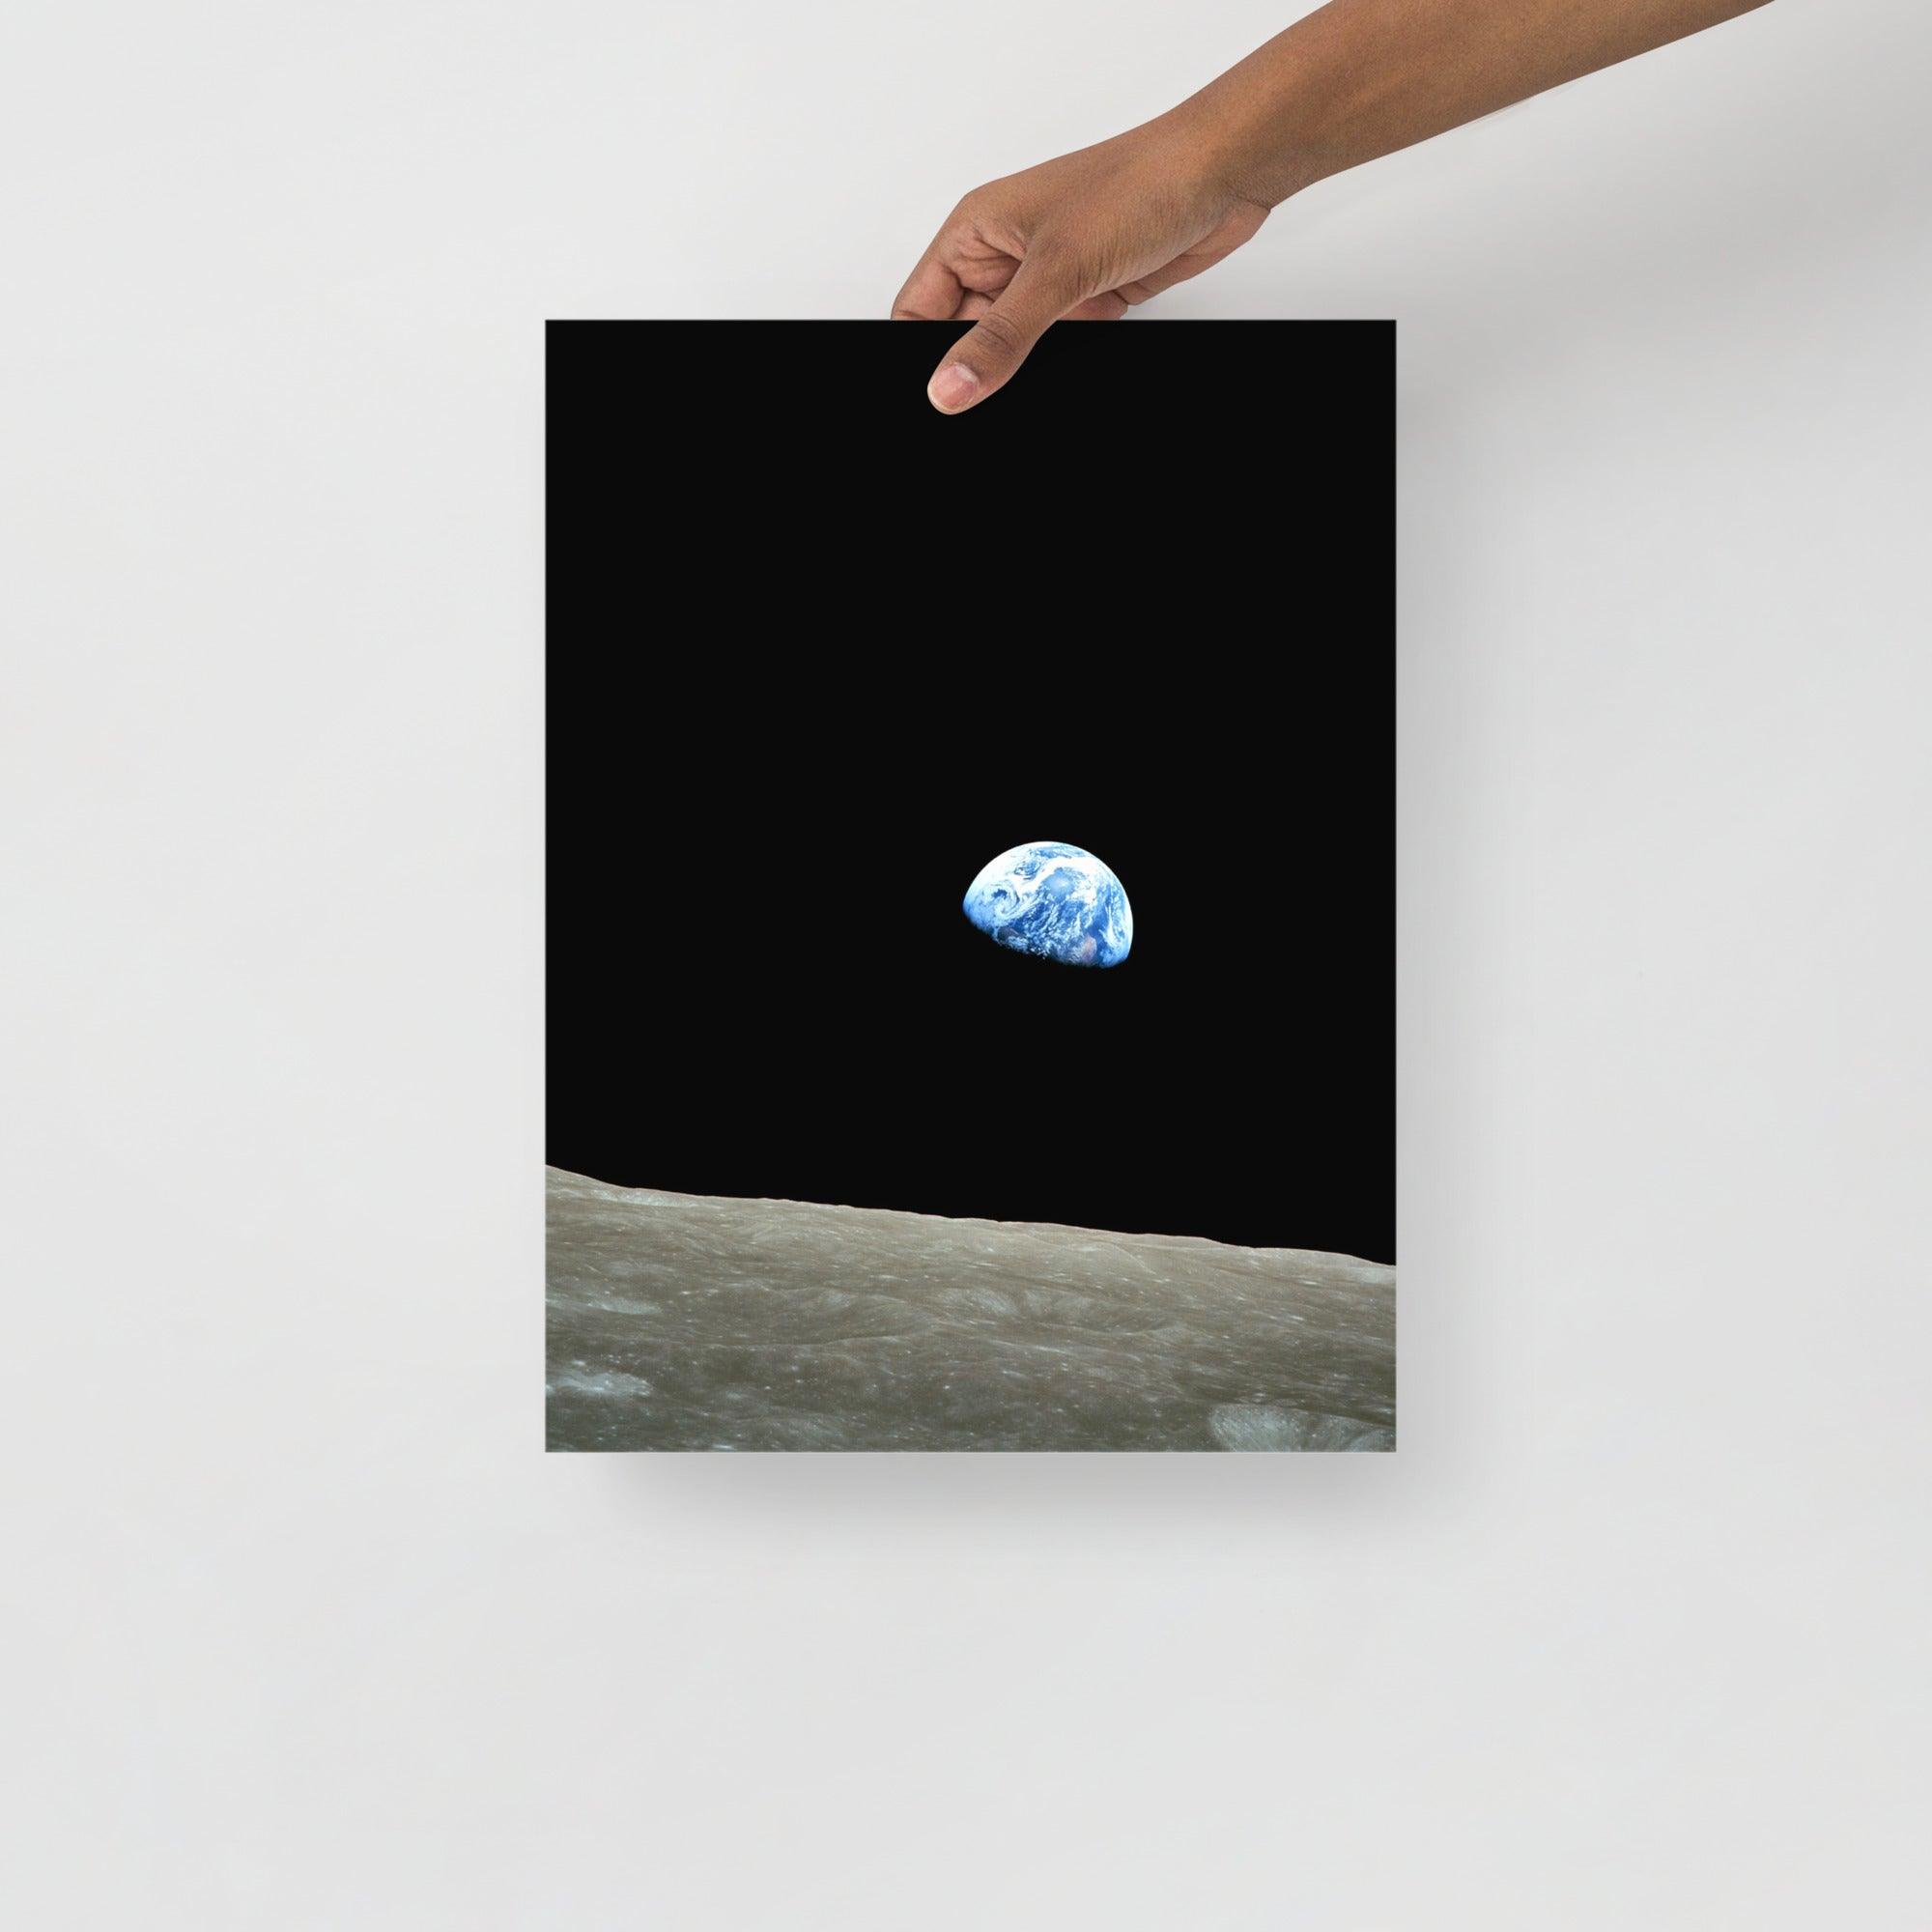 An Earthrise Apollo 8 poster on a plain backdrop in size 12x16”.